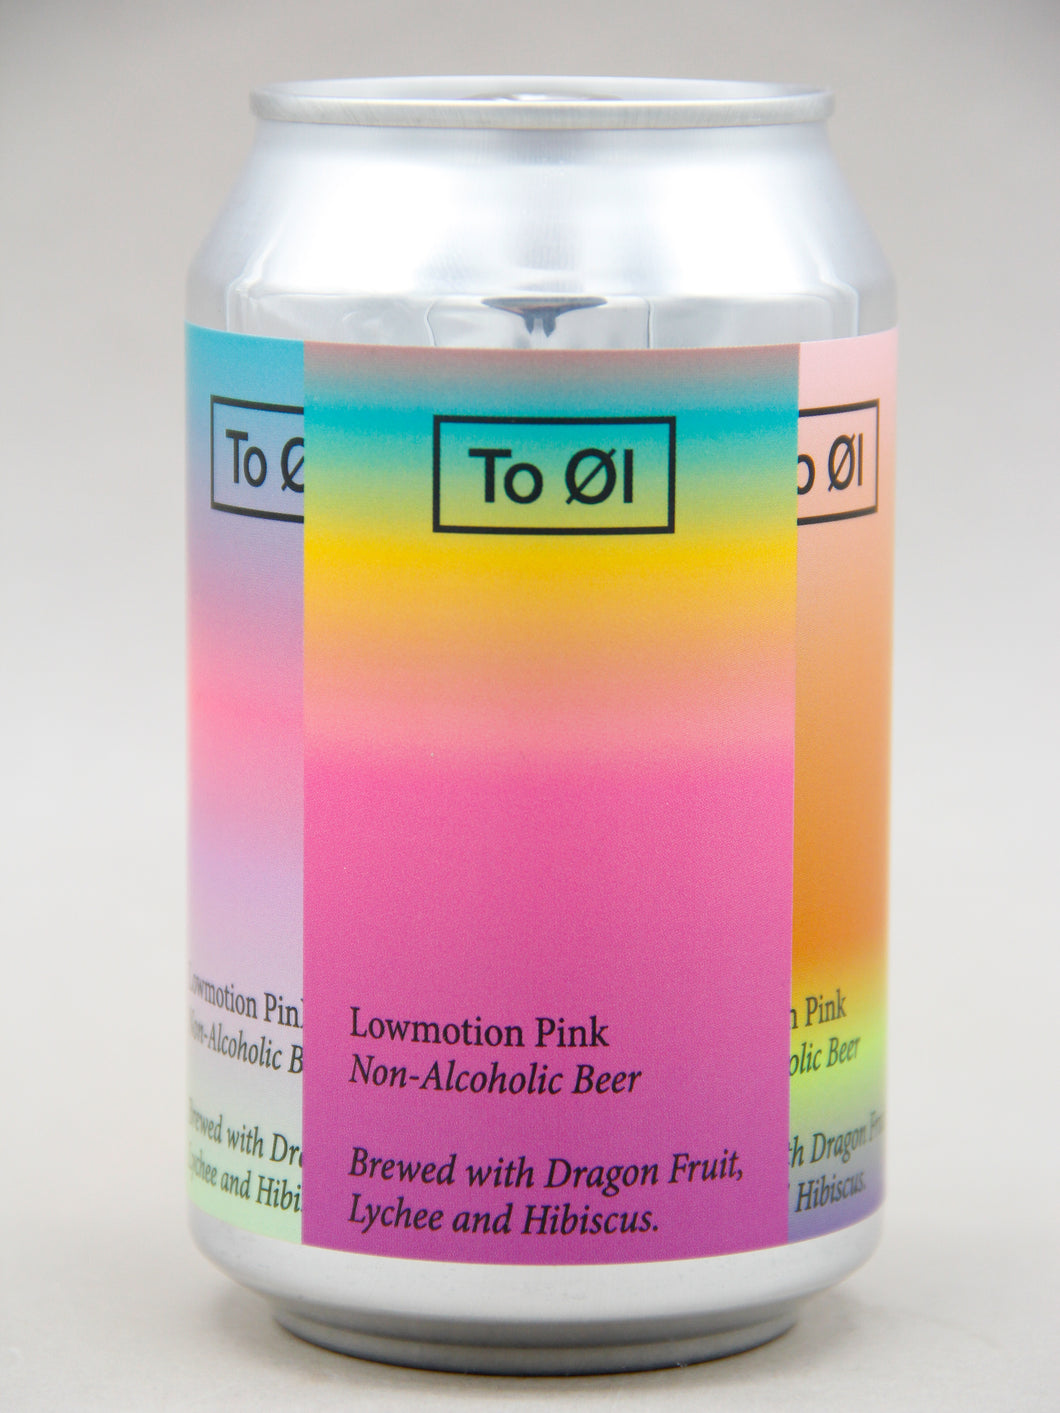 To Øl: Lowmotion Pink, Non-Alcoholic Beer (0.3%, 33cl CAN)